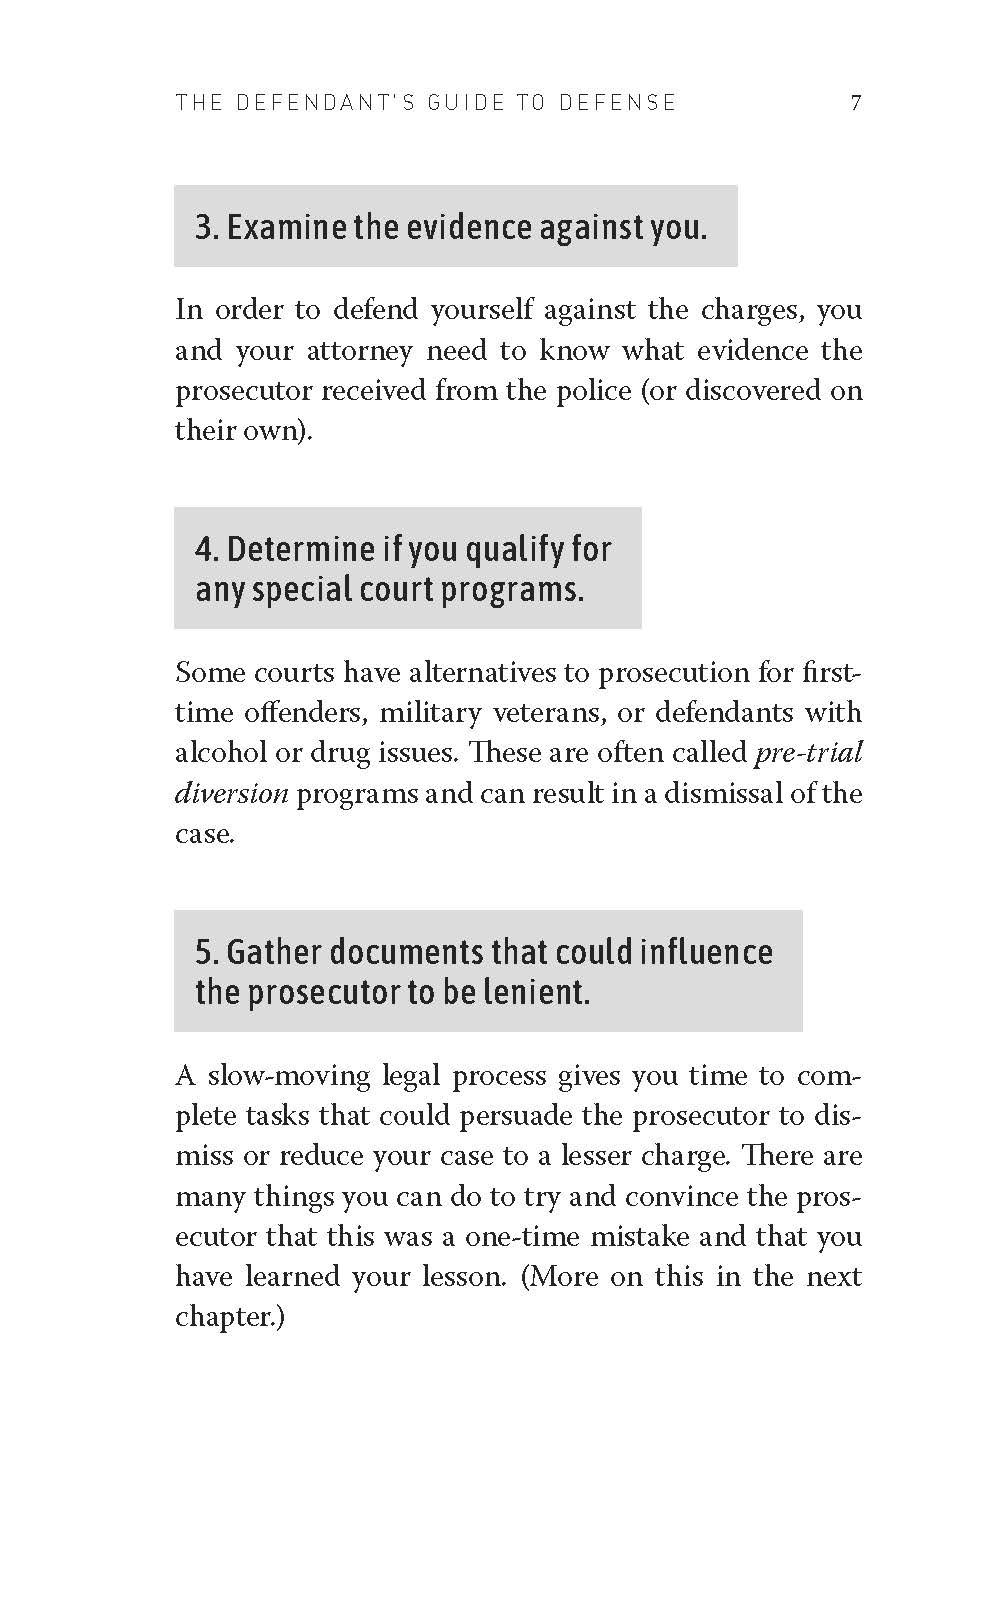 Sample_of_Defendant_s_Guide_to_Defense_Page_10.jpg